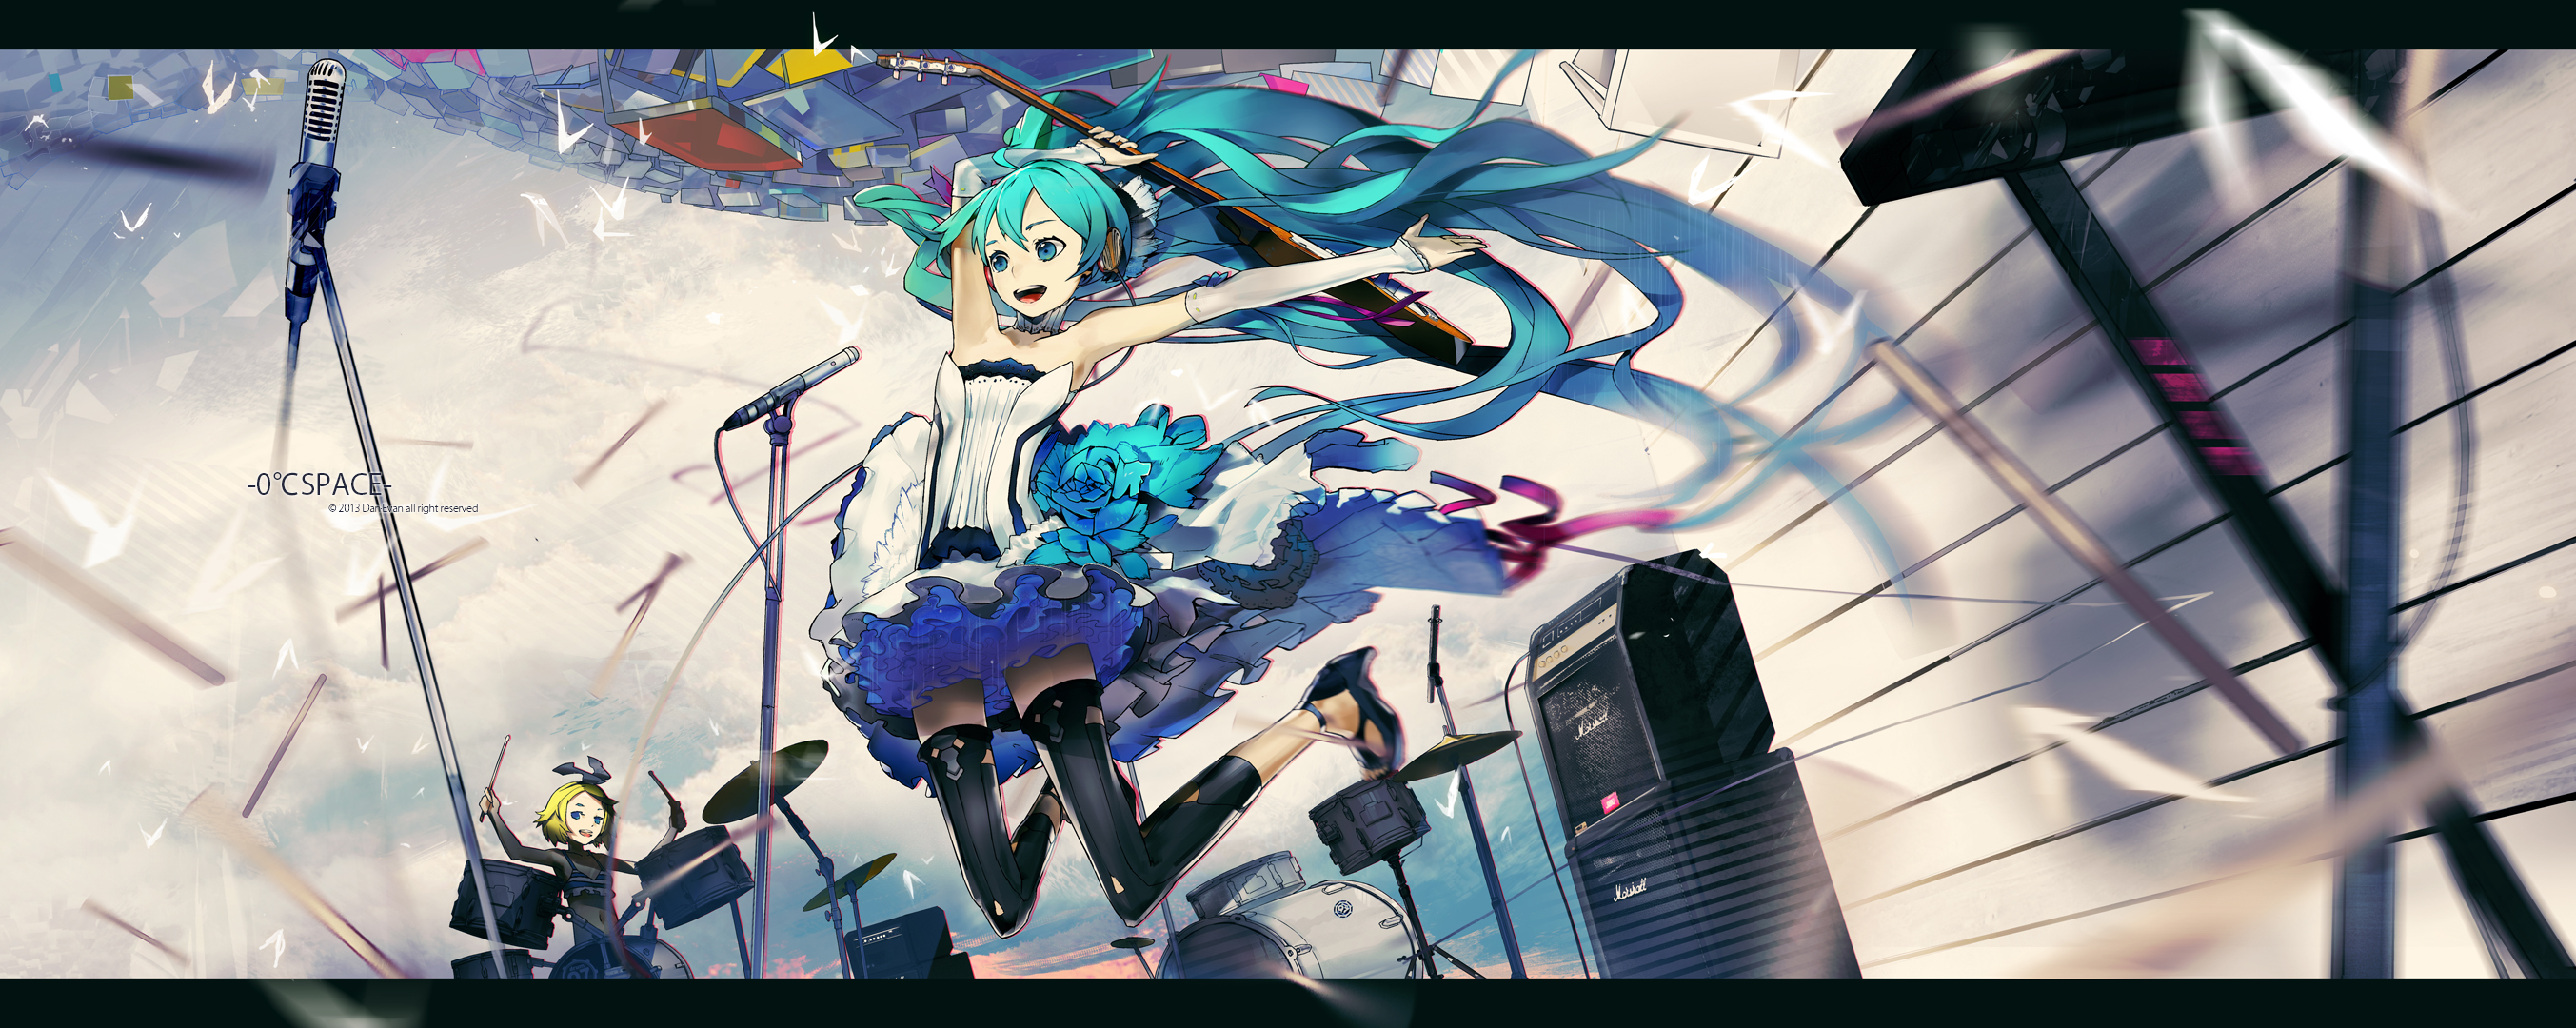 Hatsune Miku And Kagamine Rin Vocaloid And 2 More Drawn By Danevan 